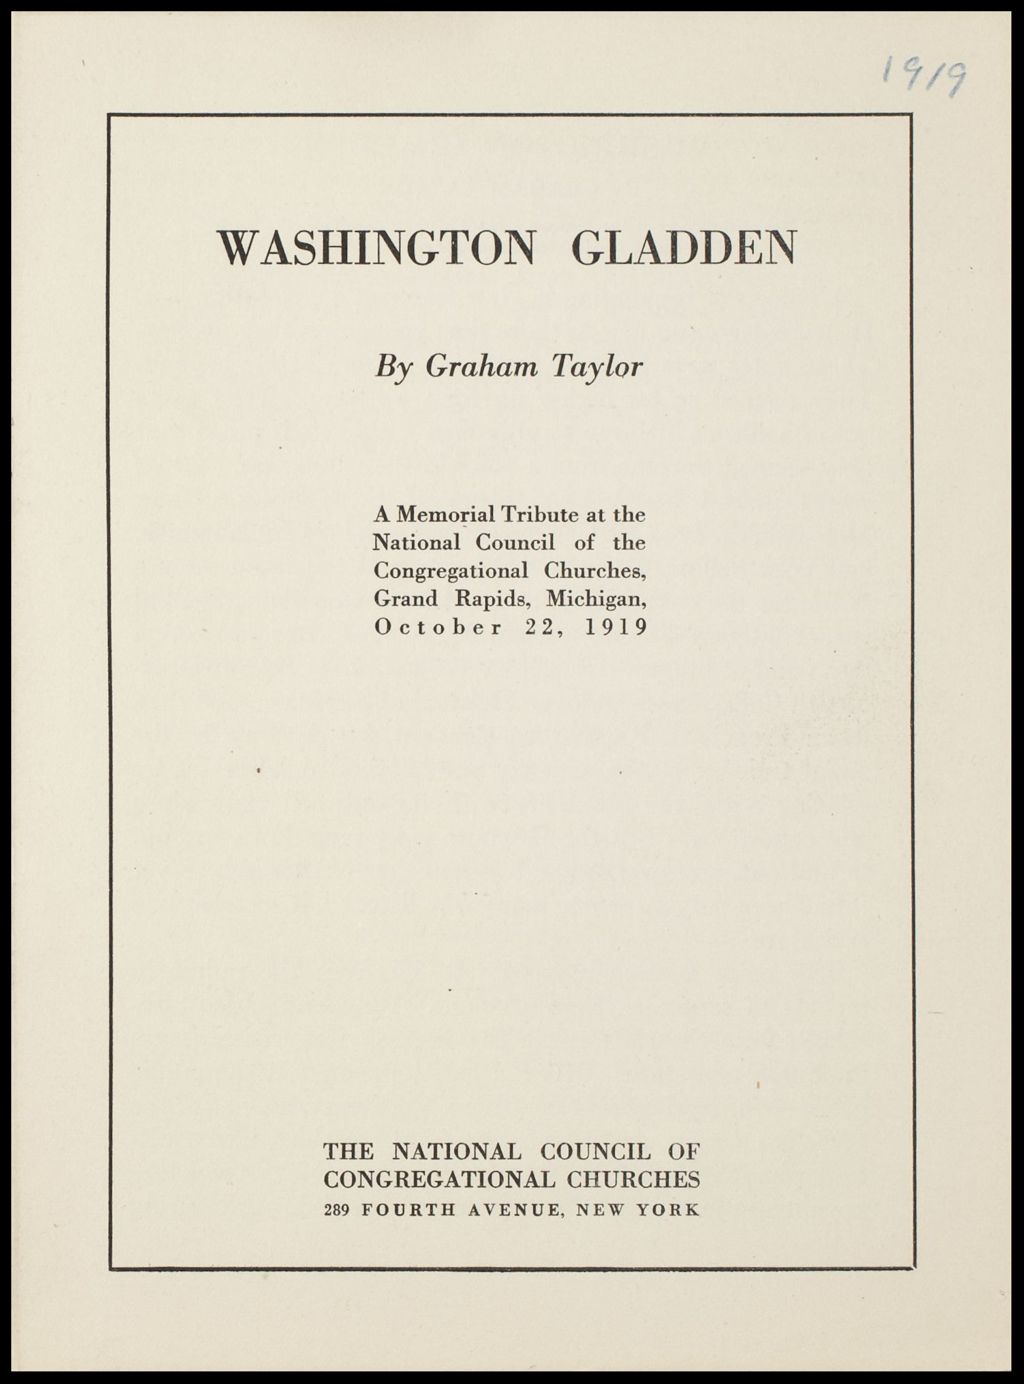 Miniature of Taylor, Graham - writings by, 1893-1919 (Folder 214)